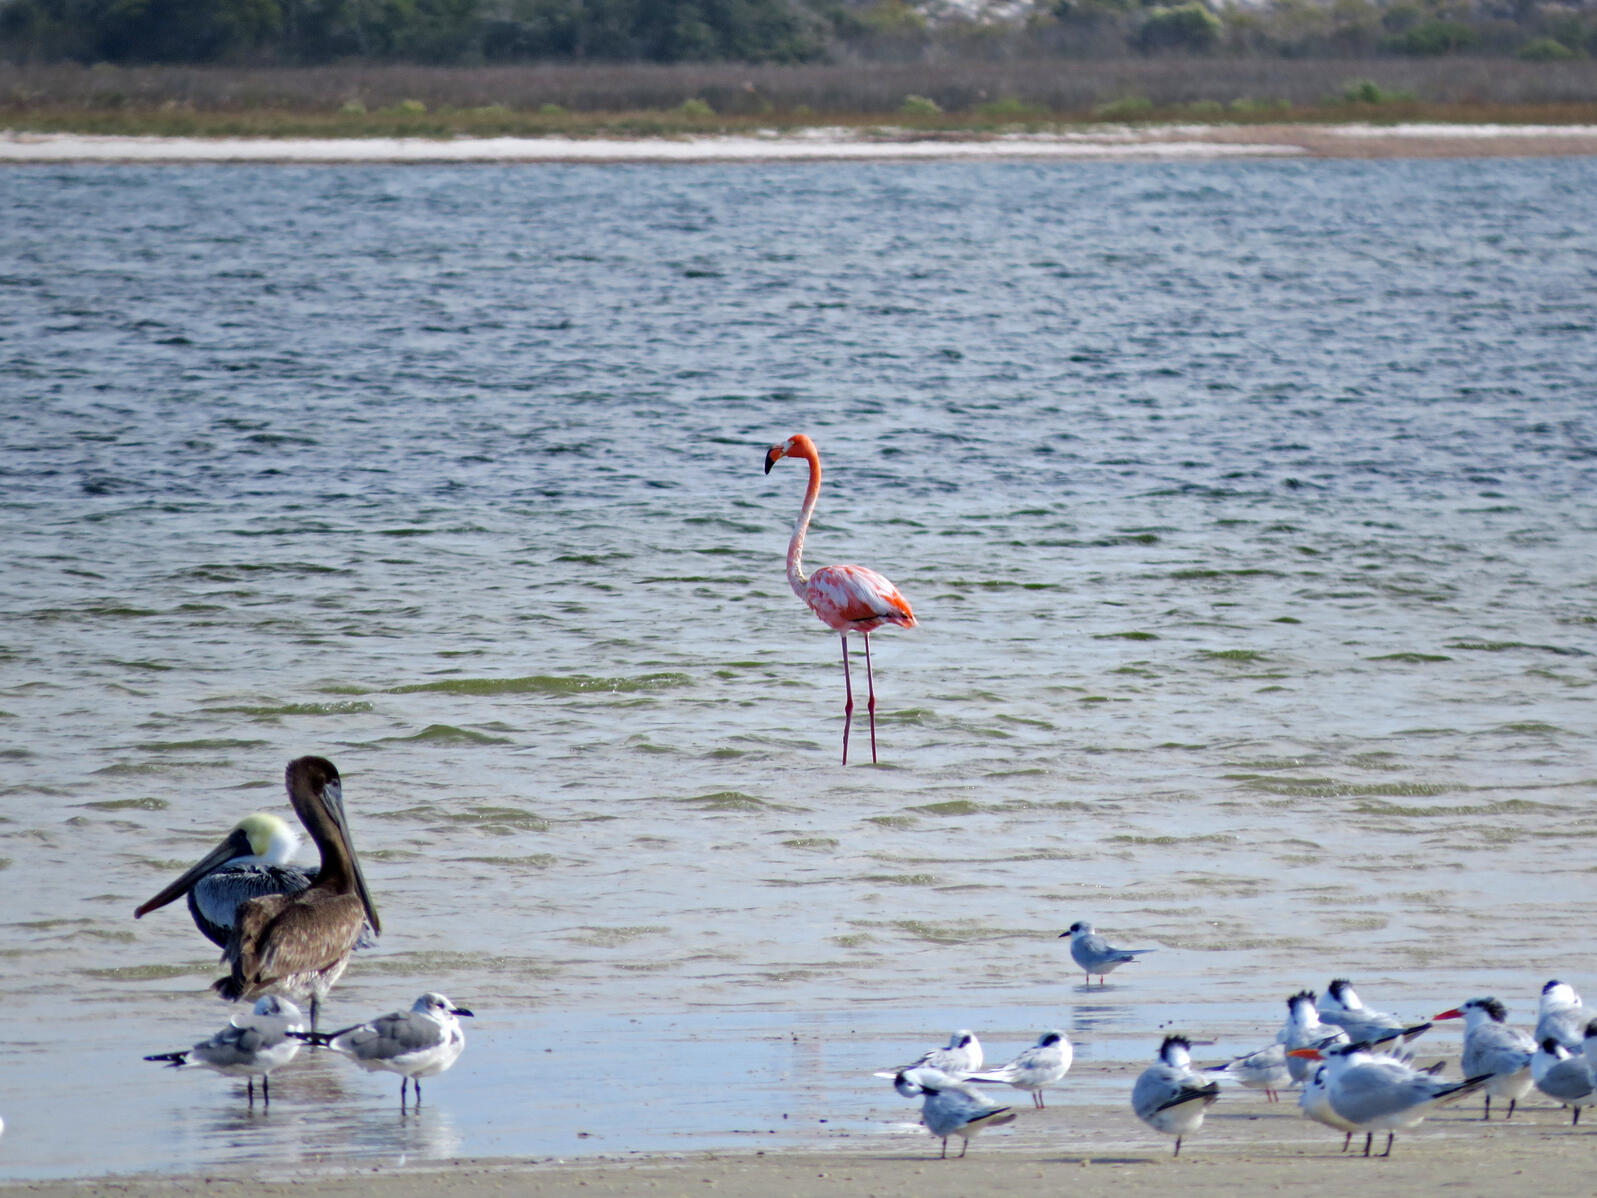 A flamingo stands in the water, with pelicans and terns in the foreground.